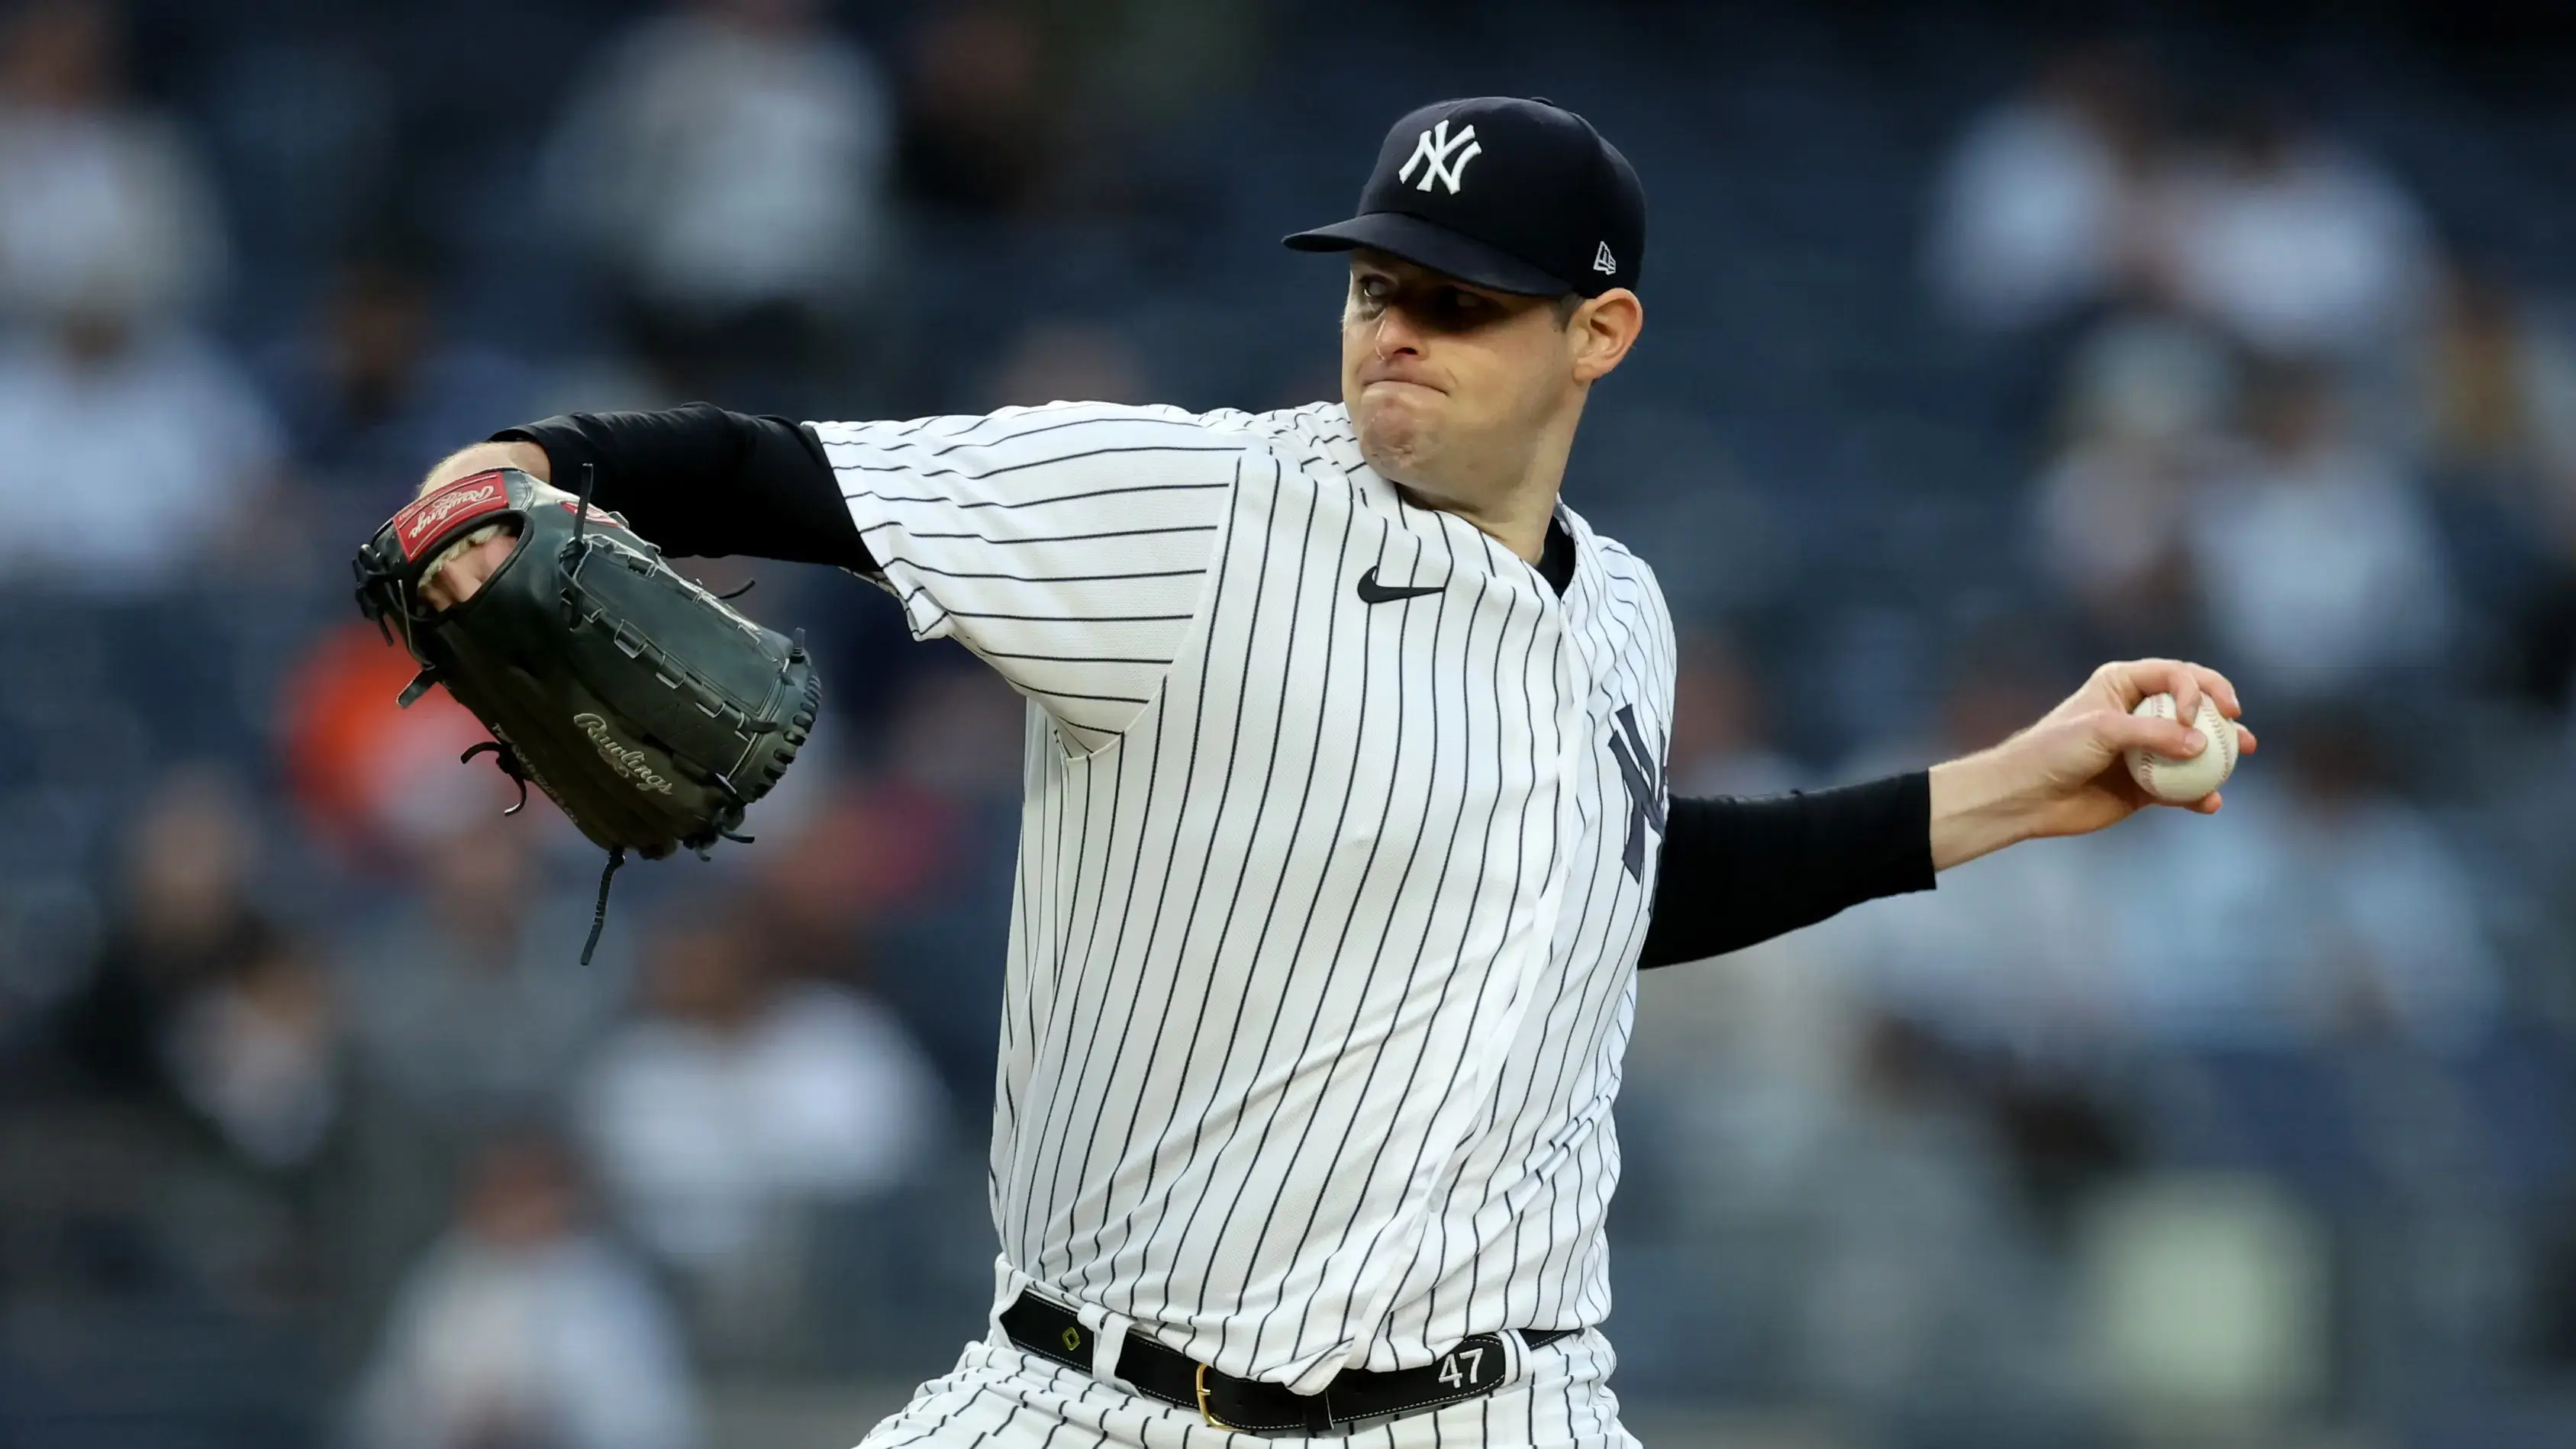 New York Yankees starting pitcher Jordan Montgomery (47) pitches against the Baltimore Orioles during the second inning at Yankee Stadium. / Brad Penner-USA TODAY Sports